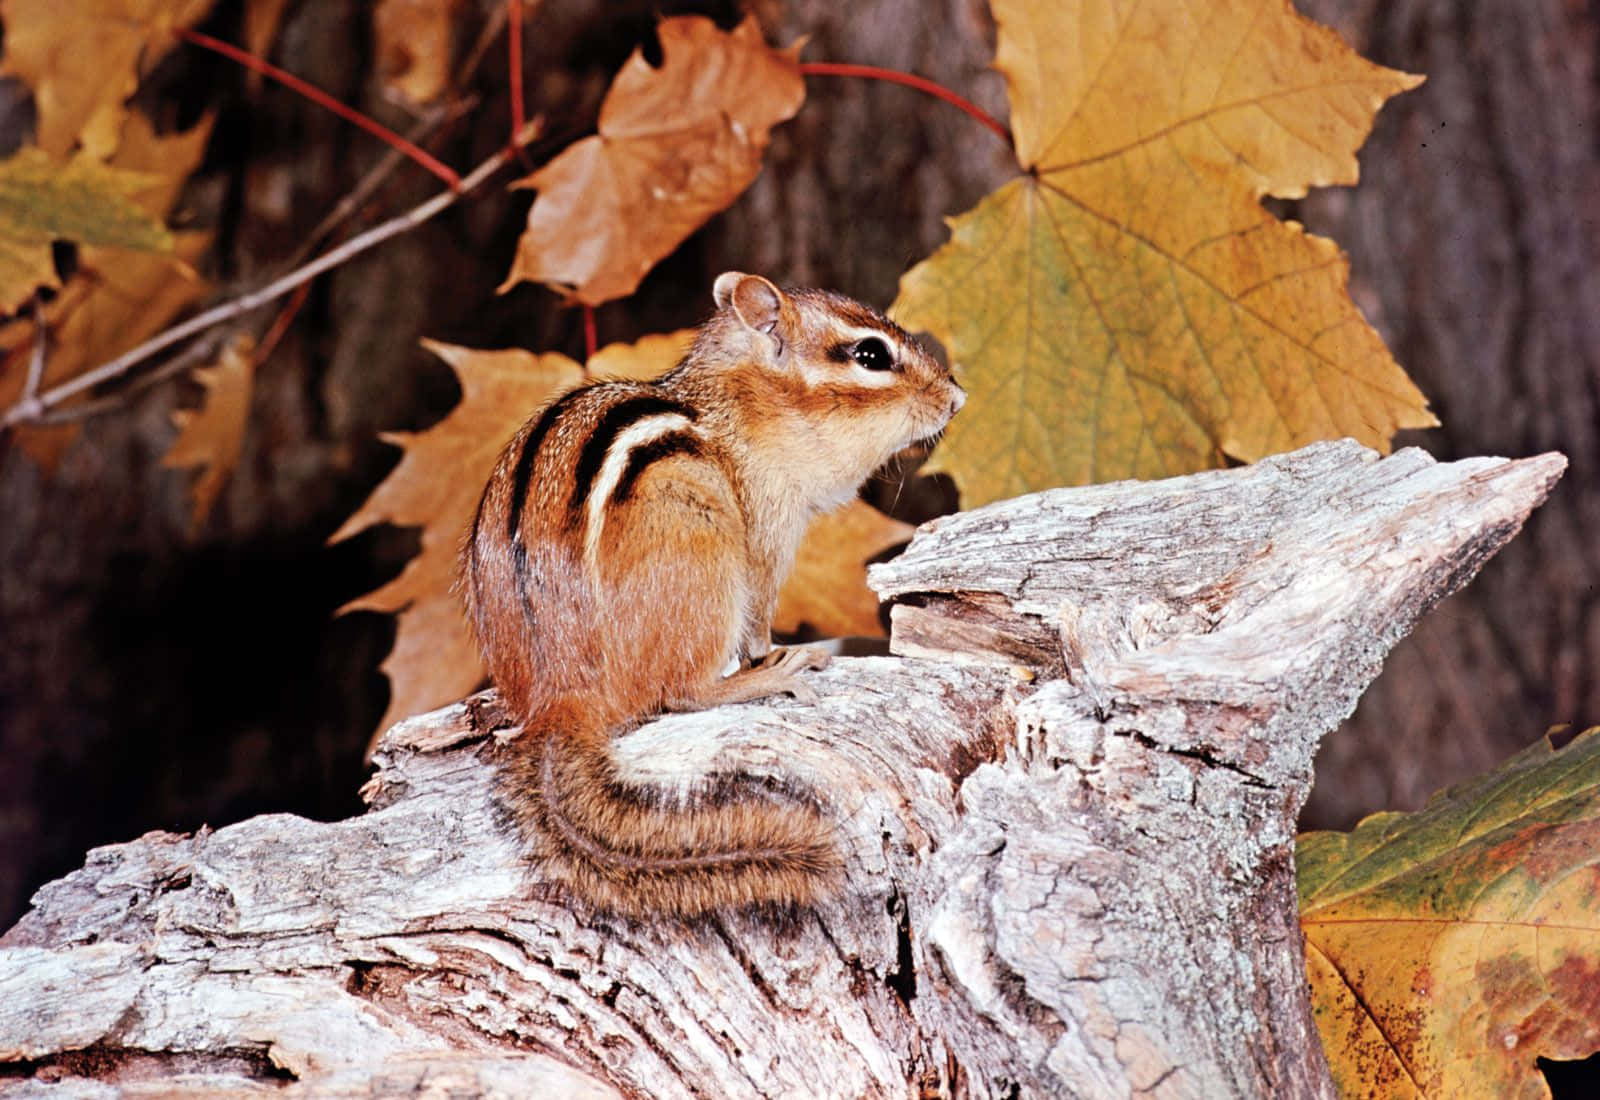 A cute chipmunk hanging around in its natural environment